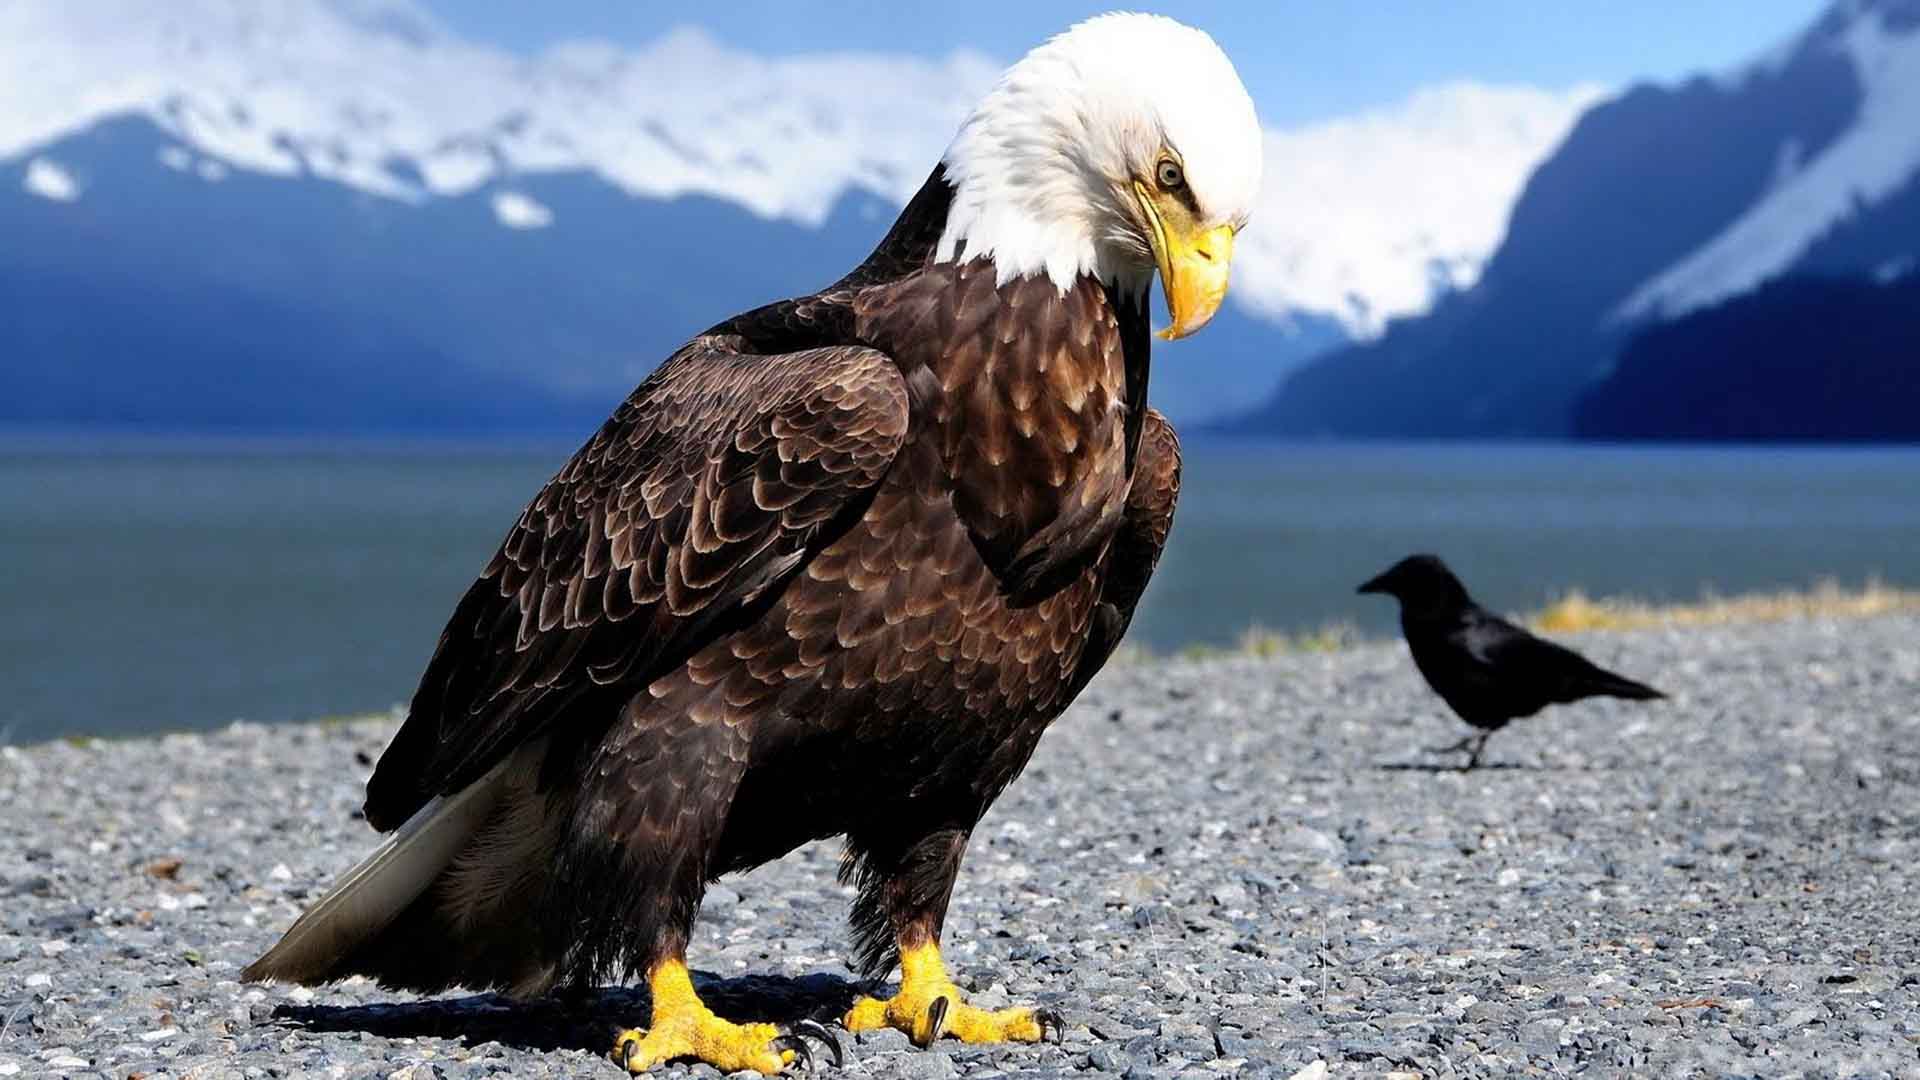 Eagle Symbol Of Nature Latest HD Wallpapers Free Download | New HD ...